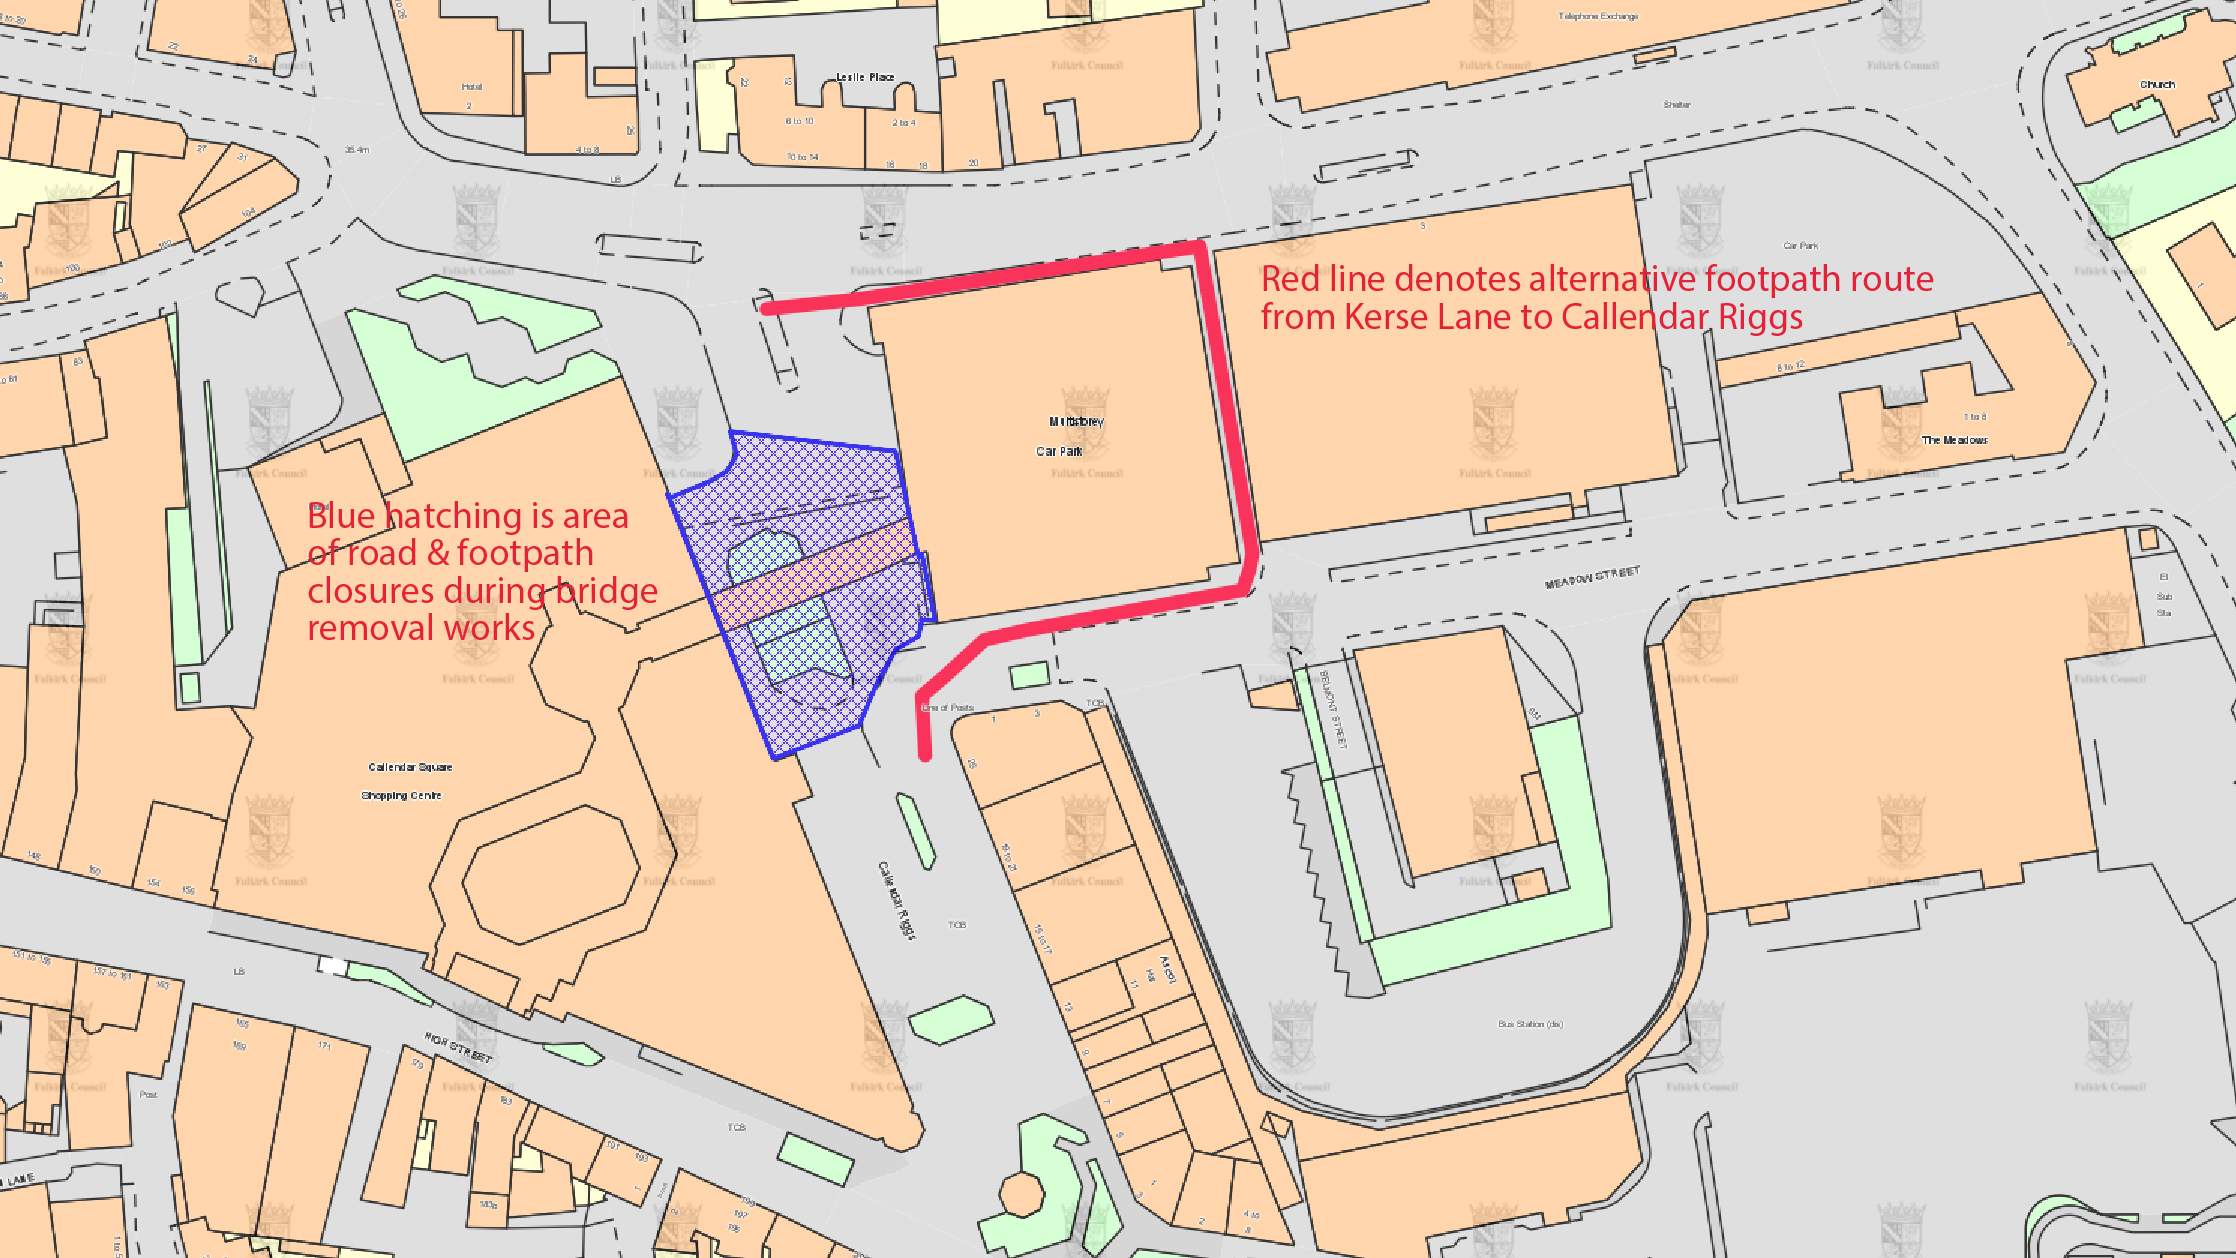 A map that shows a footpath diversion, highlighting the road and footpath closure during the bridge removal. The bridge links Callendar Square Shopping Centre with the multi-storey car park.